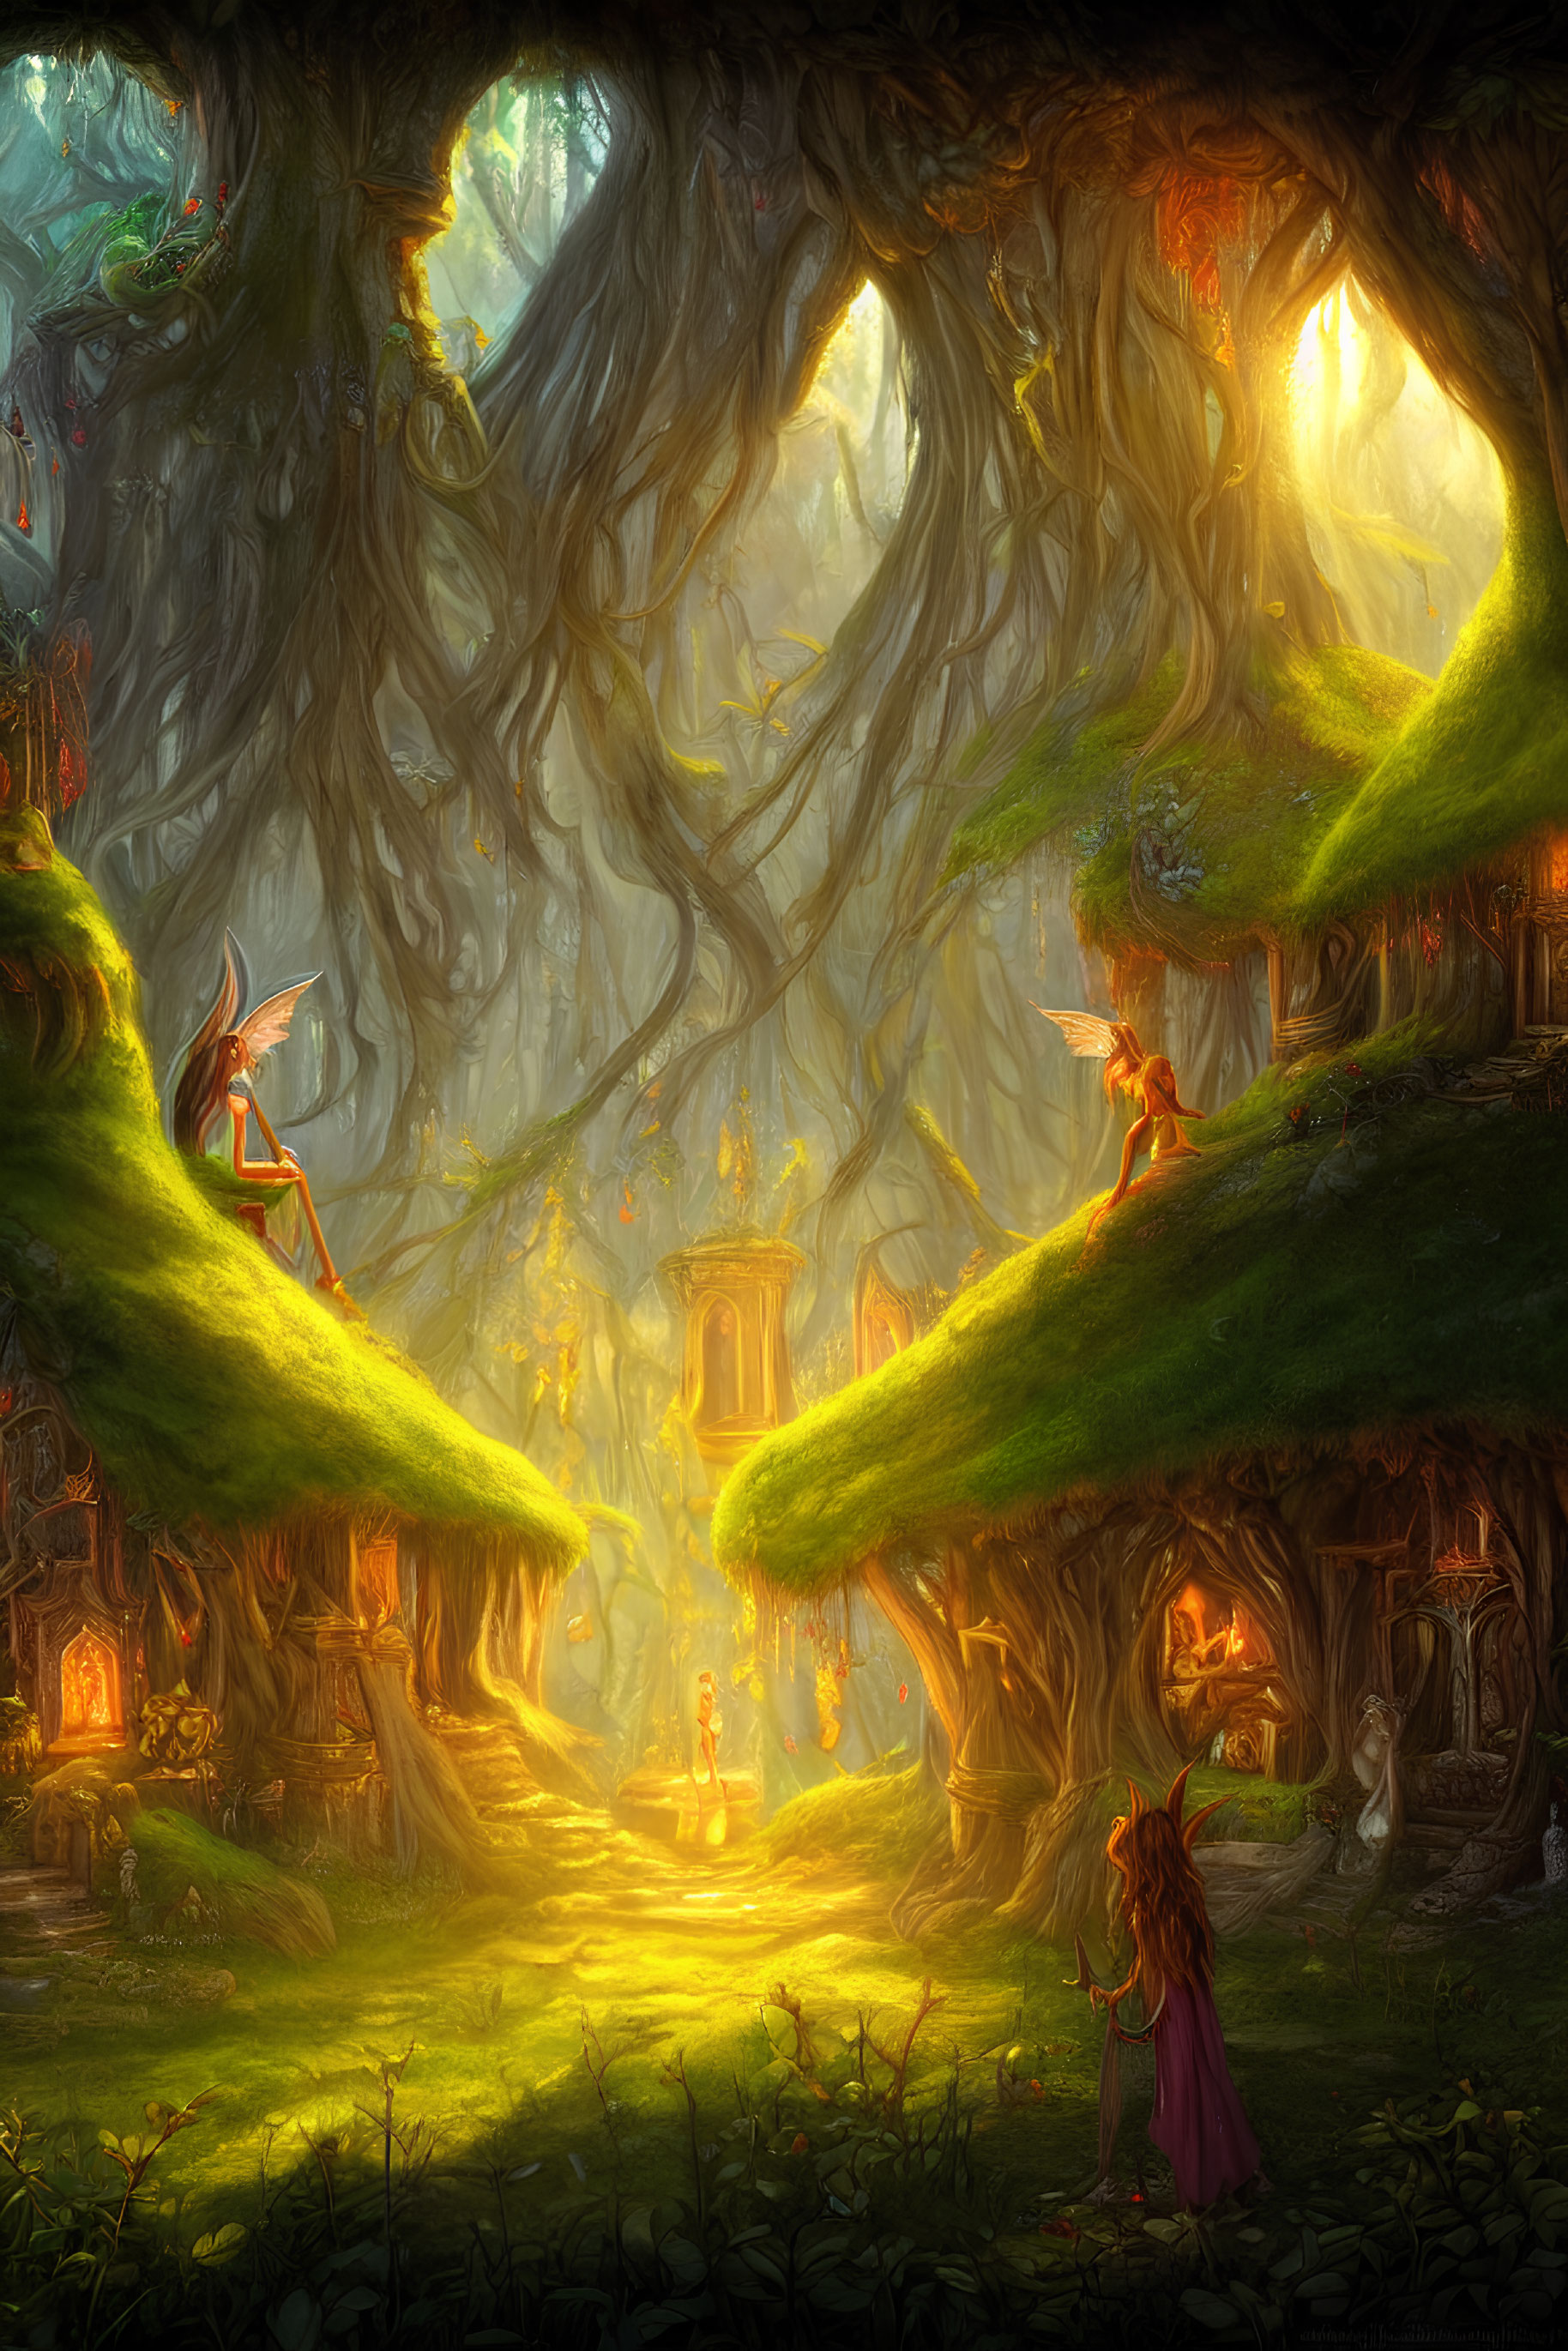 Moss-Covered Trees and Glowing Lanterns in Enchanting Forest